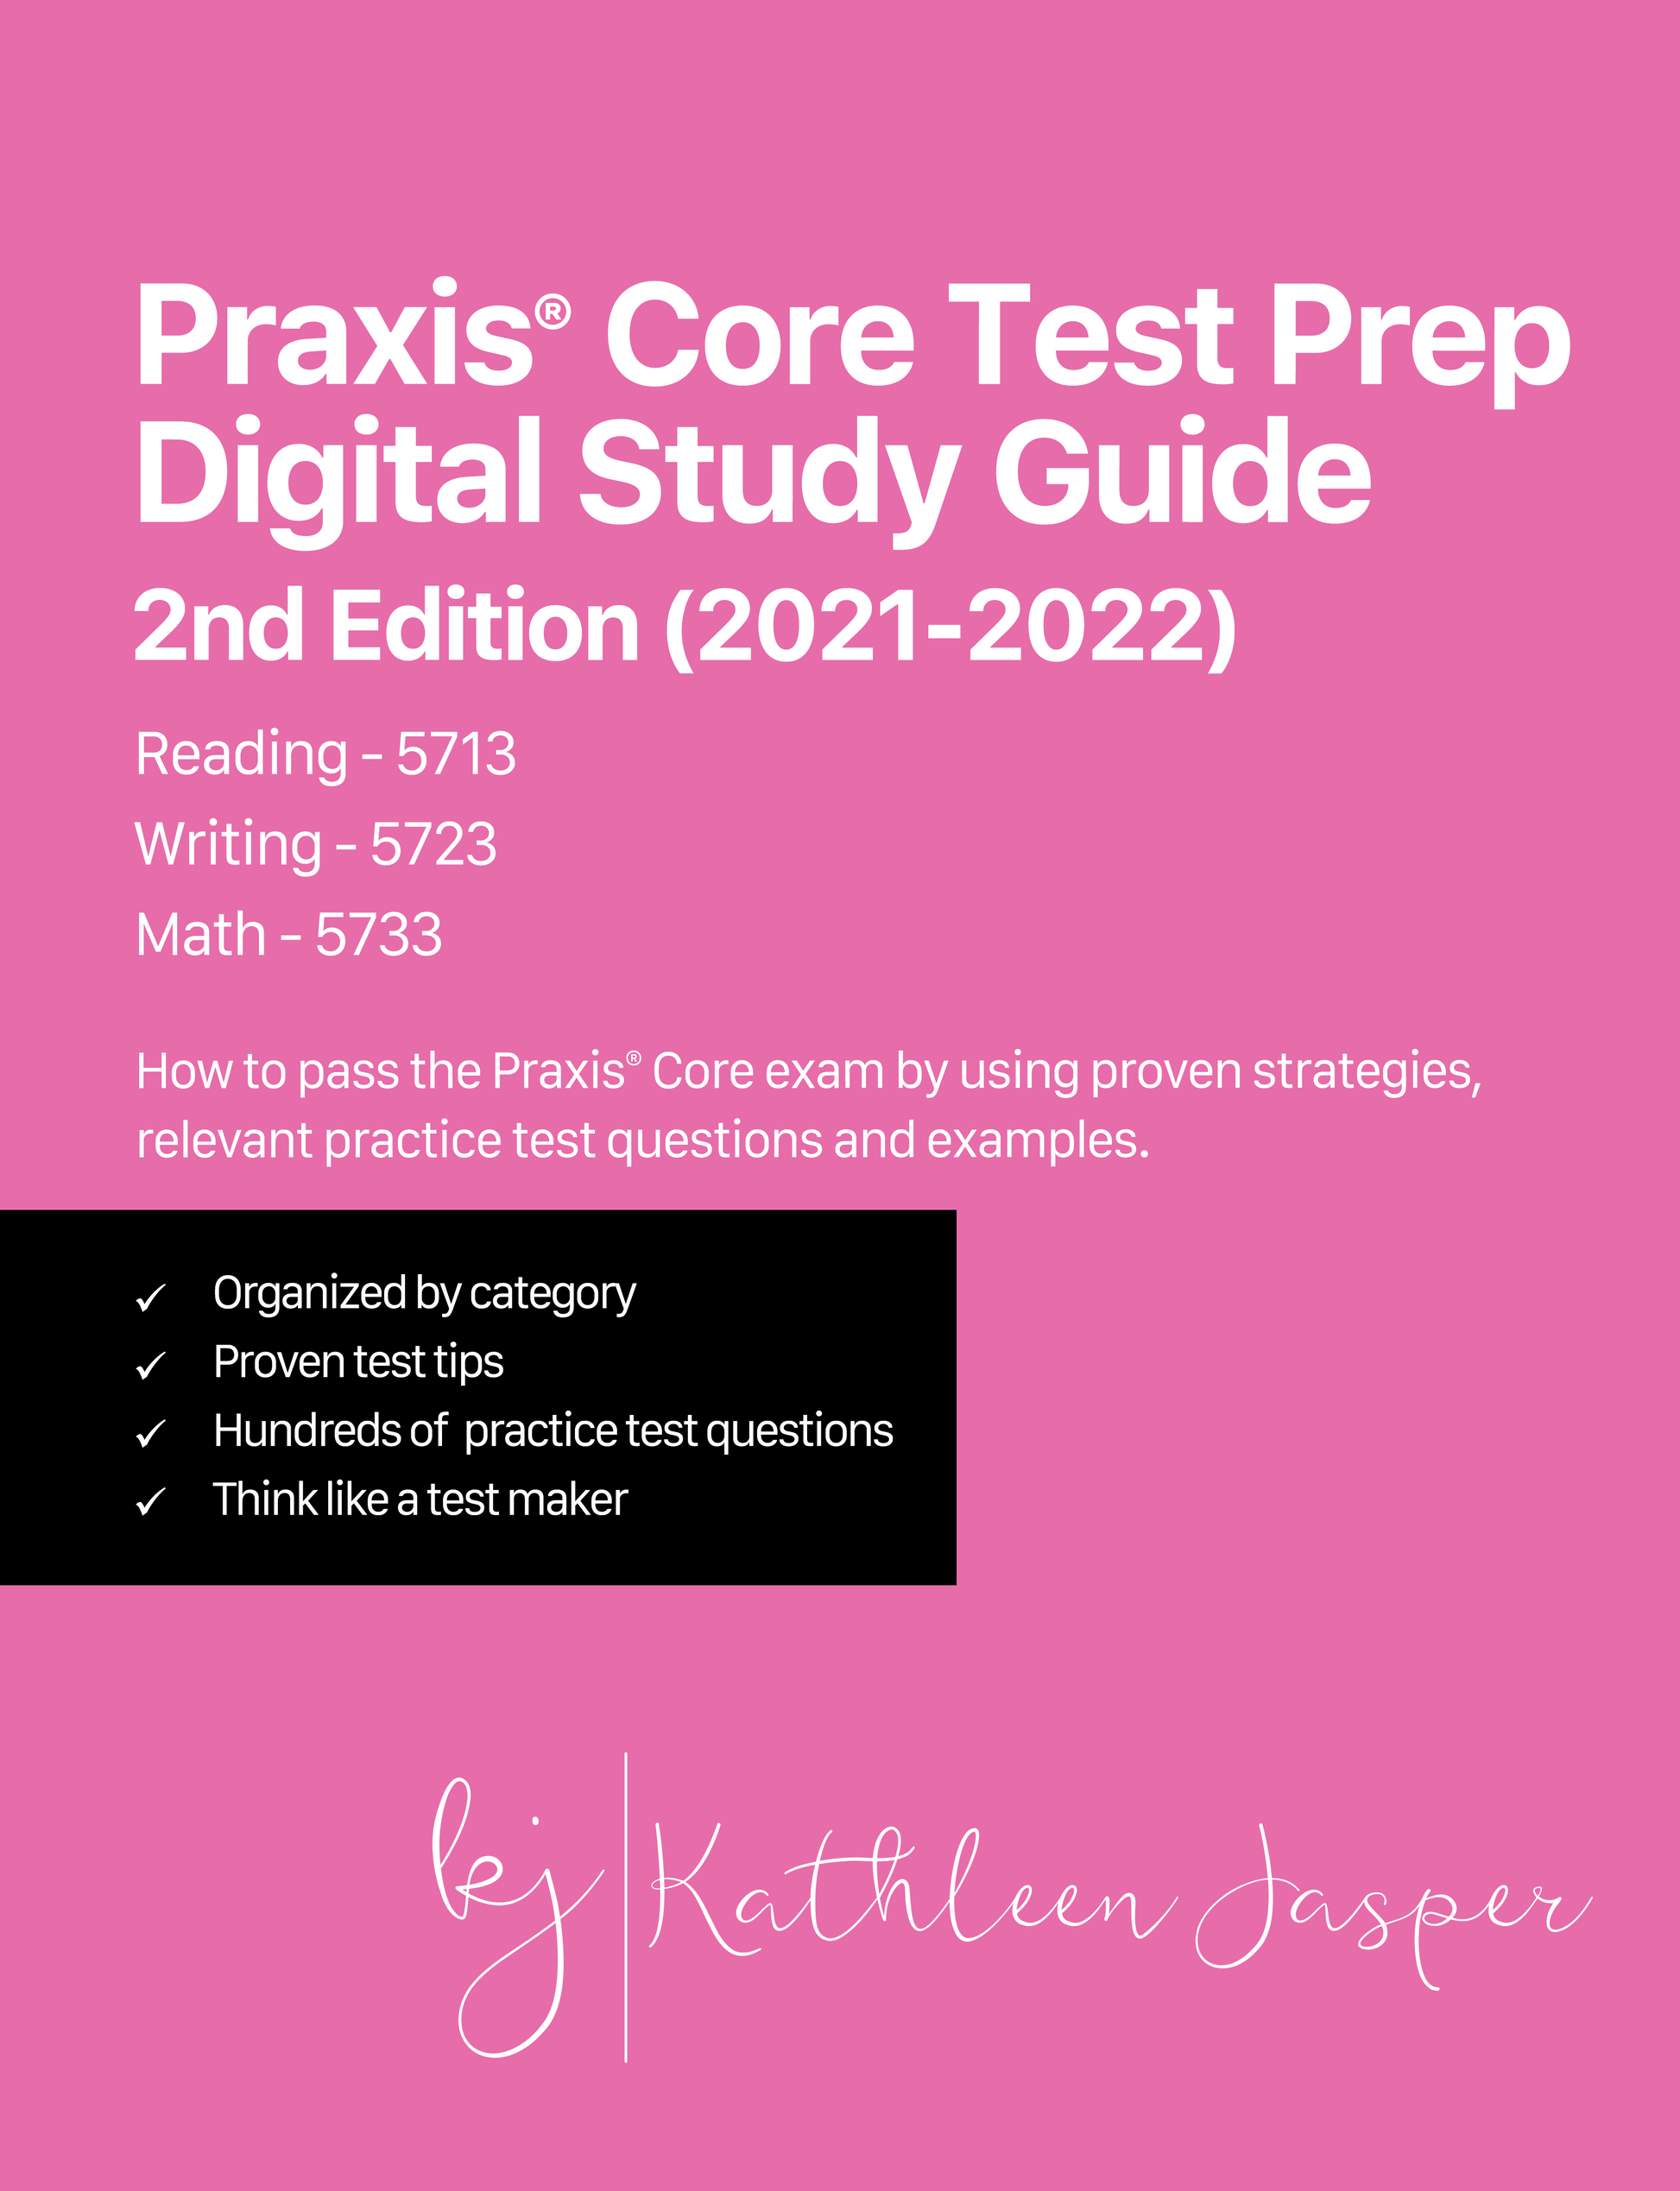 Praxis core test prep digital study guide 2nd edition